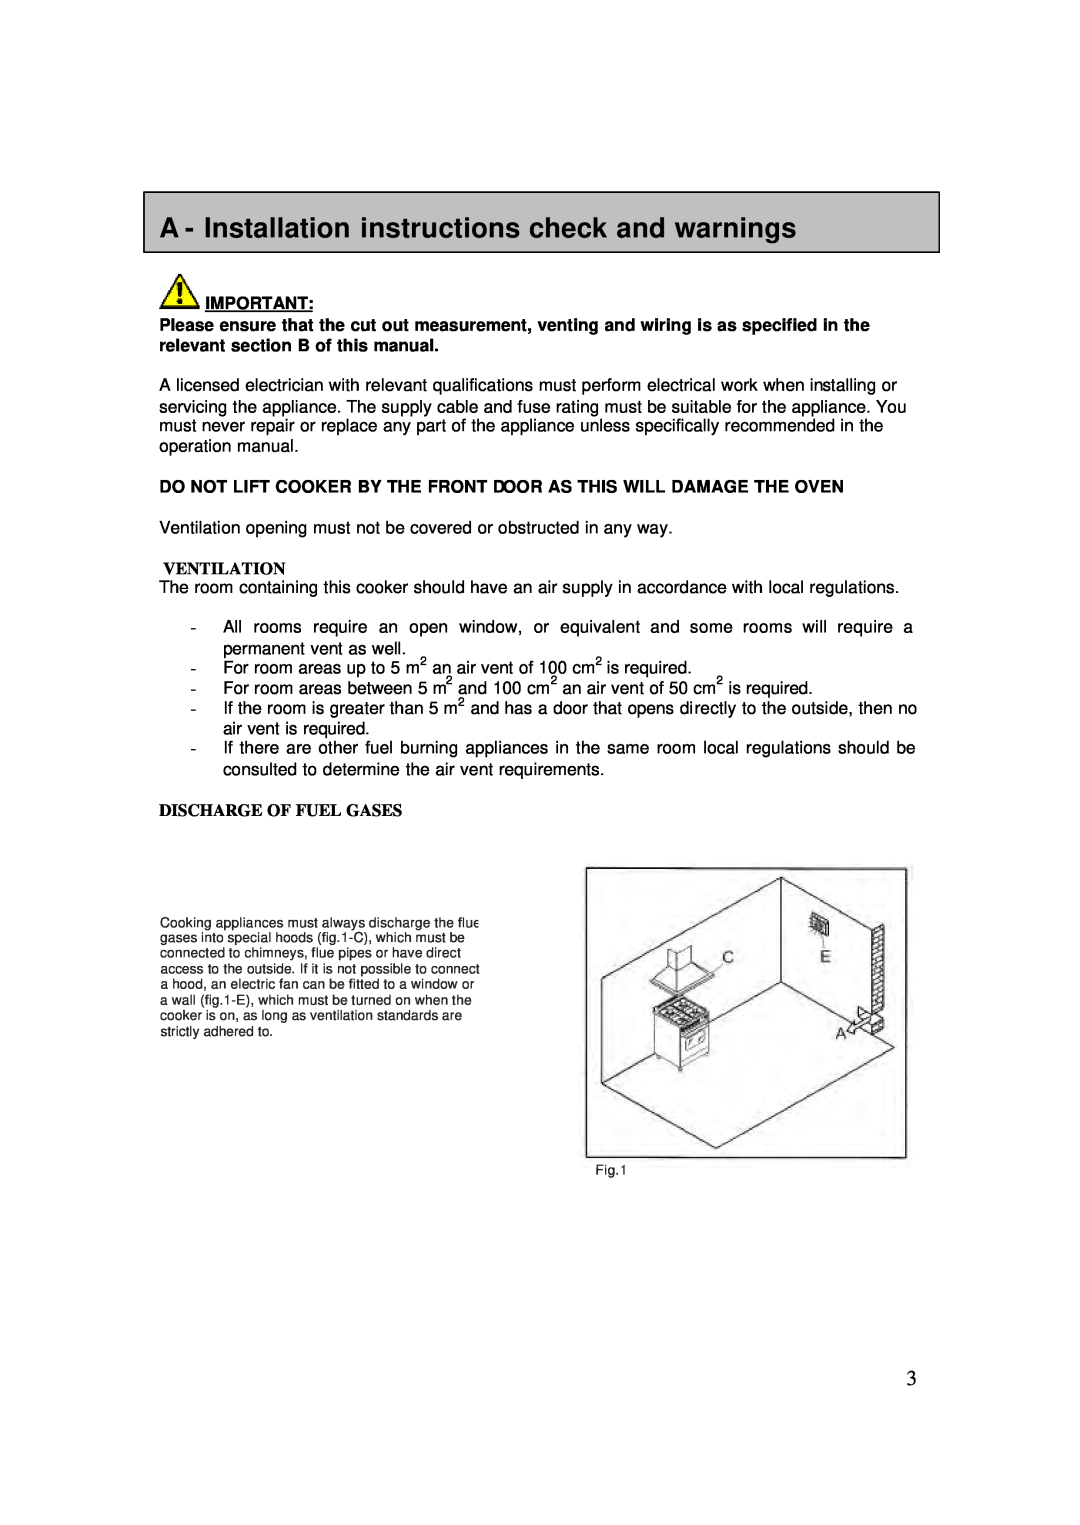 AEG 4006G-M user manual A - Installation instructions check and warnings, Ventilation, Discharge Of Fuel Gases 